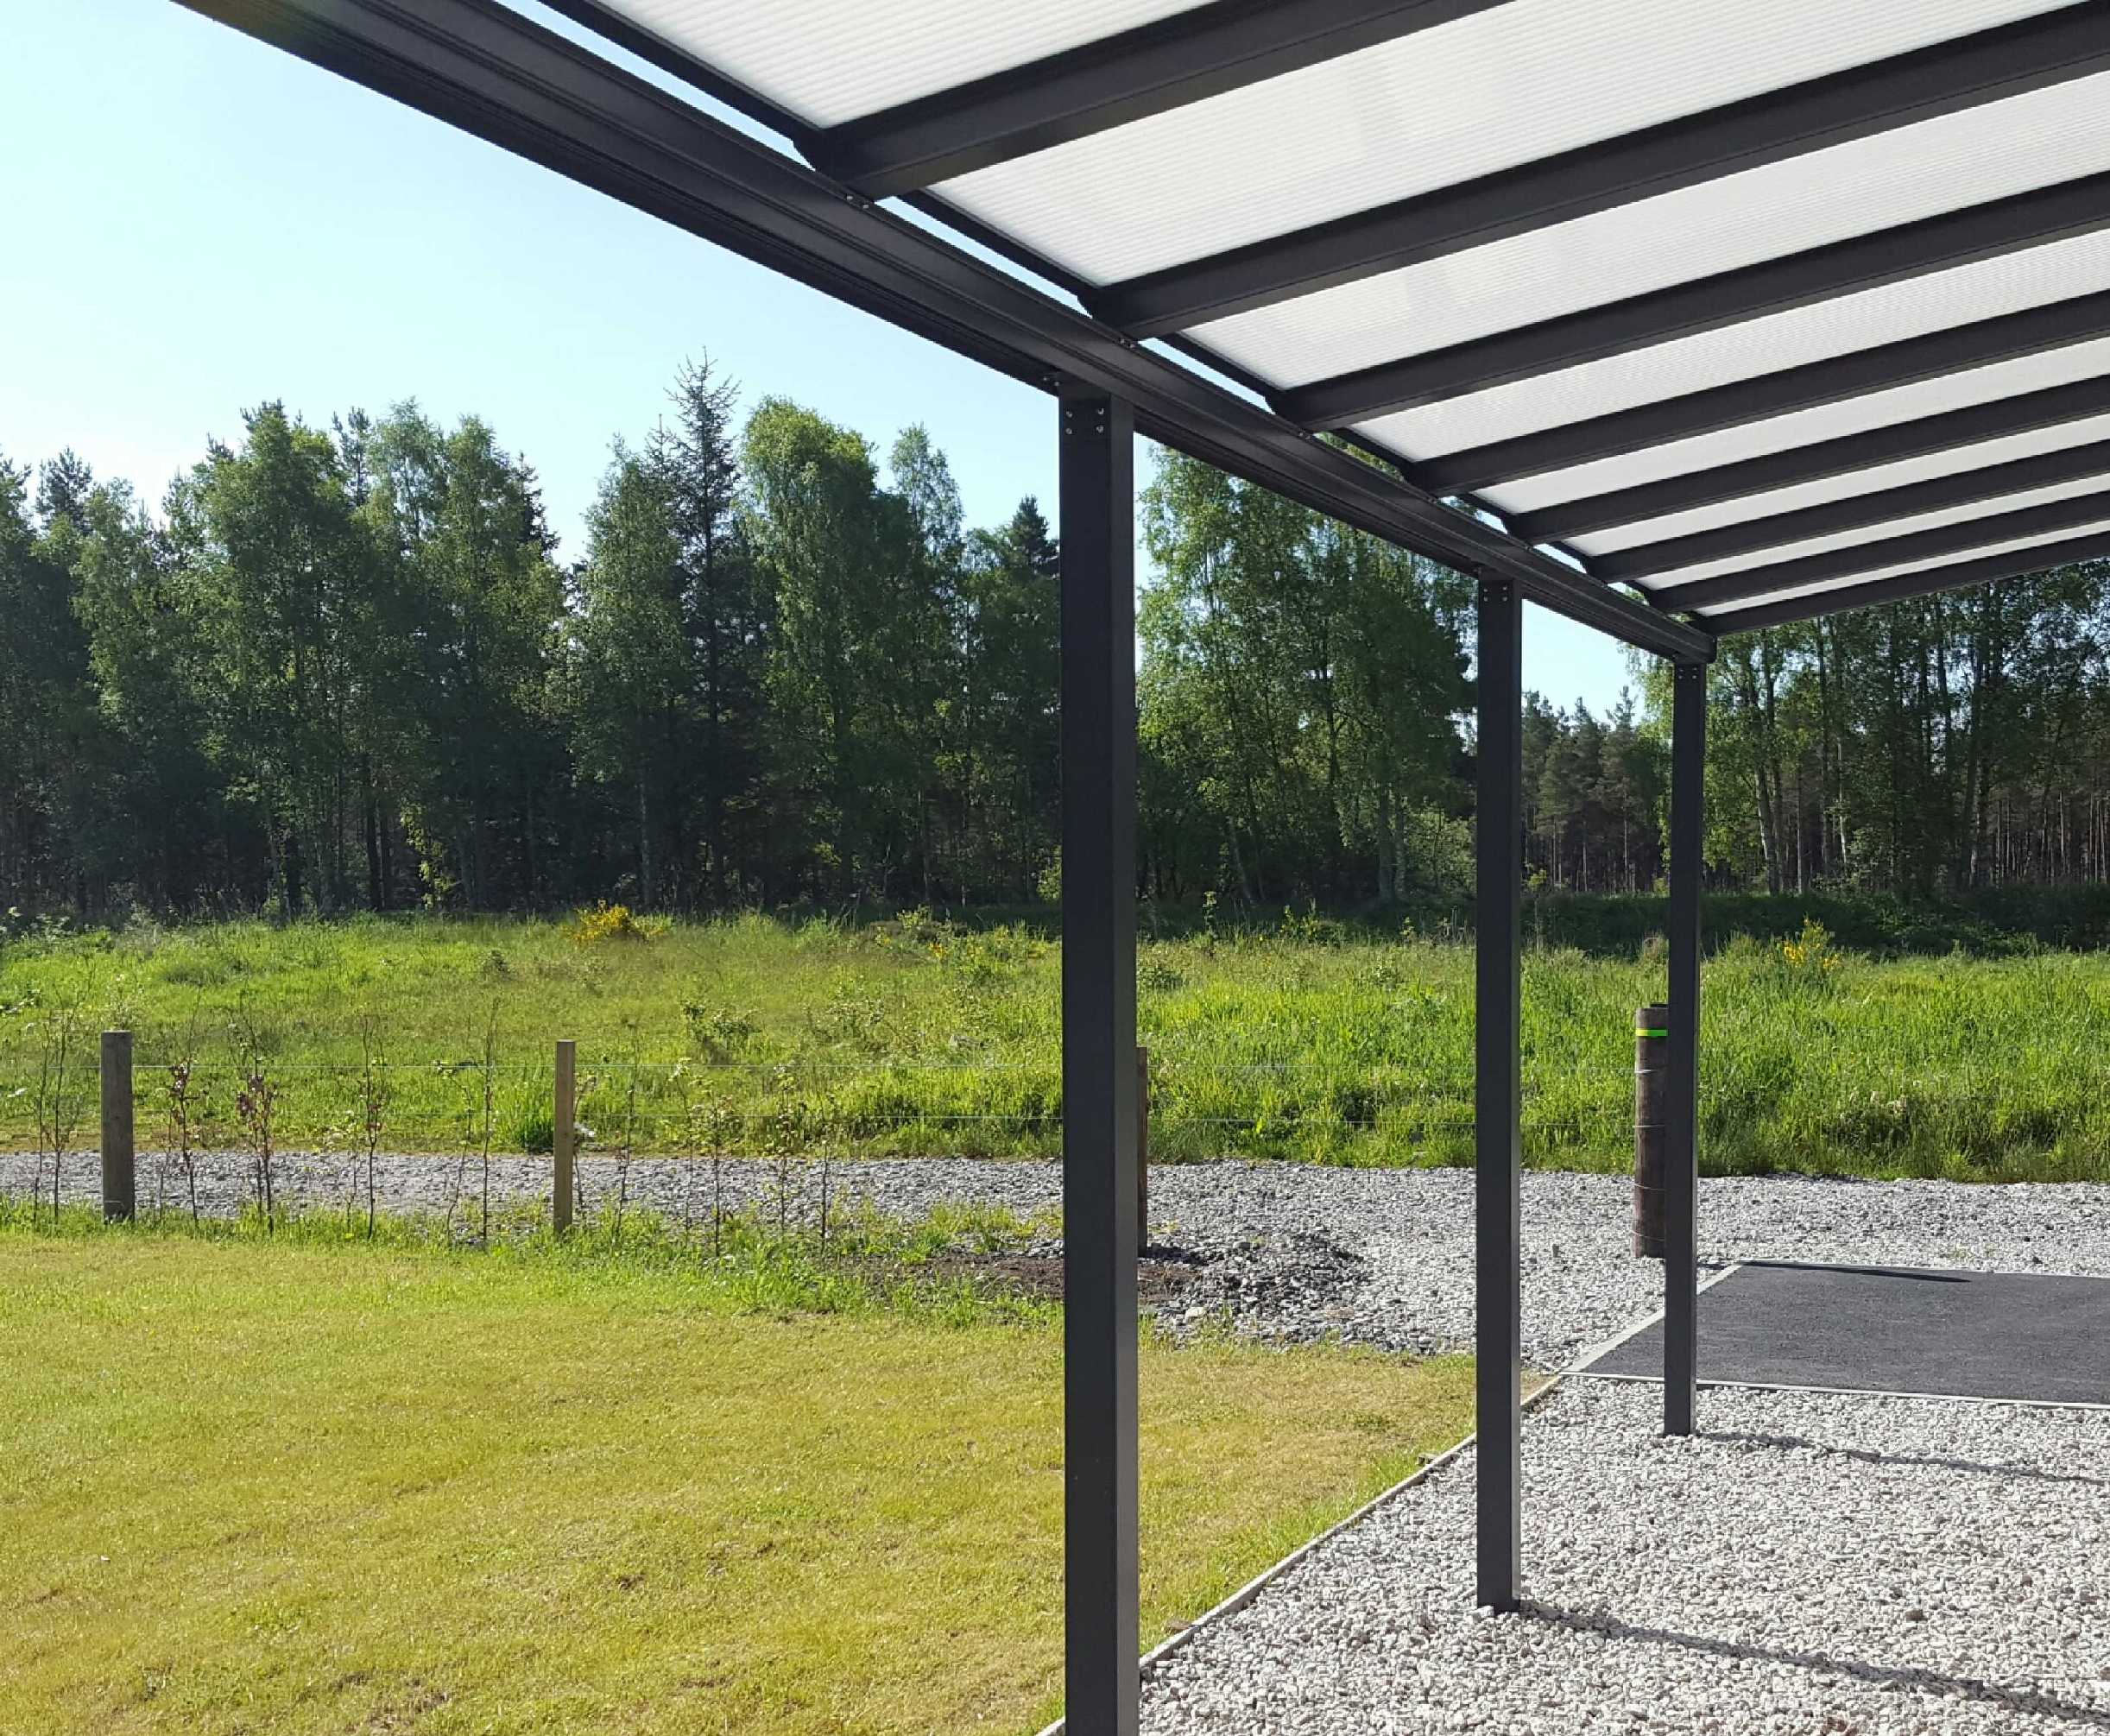 Omega Smart Lean-To Canopy, Anthracite Grey, 6mm Glass Clear Plate Polycarbonate Glazing - 10.5m (W) x 3.5m (P), (5) Supporting Posts